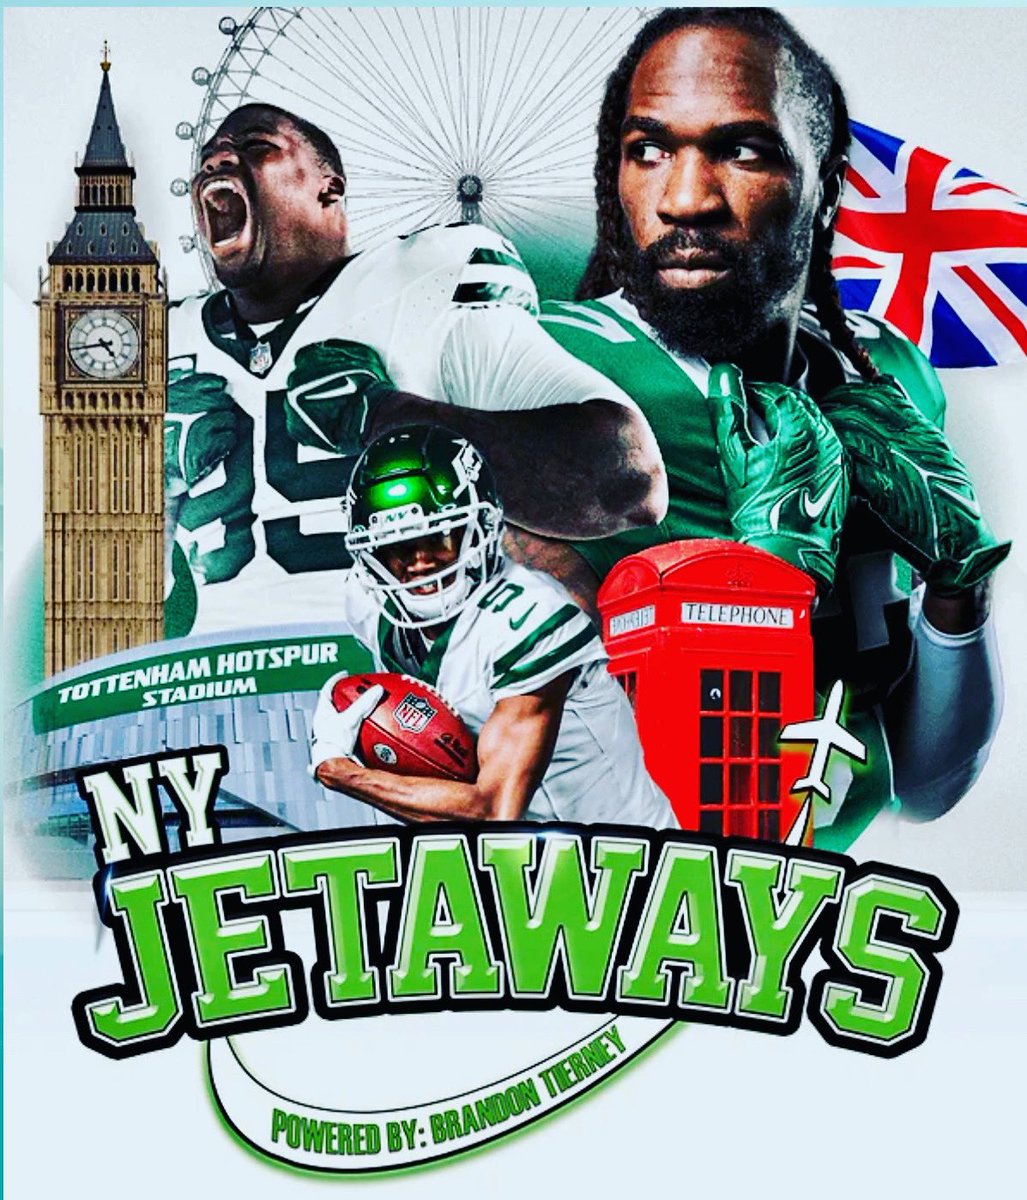 🚨 ROAD TRIP 🚨 🍏 Round trip/non-stop to London 🍏 All ground transfers 🍏 Hotel 🍏 Private double-decker tour of London 🍏 Sat evening cruise on Thames River 🍏 Game day tailgate hosted by me 🍏 Tickets Jets vs Vikes ONLY 150 slots available! 👉🏻 nyjetaways.net